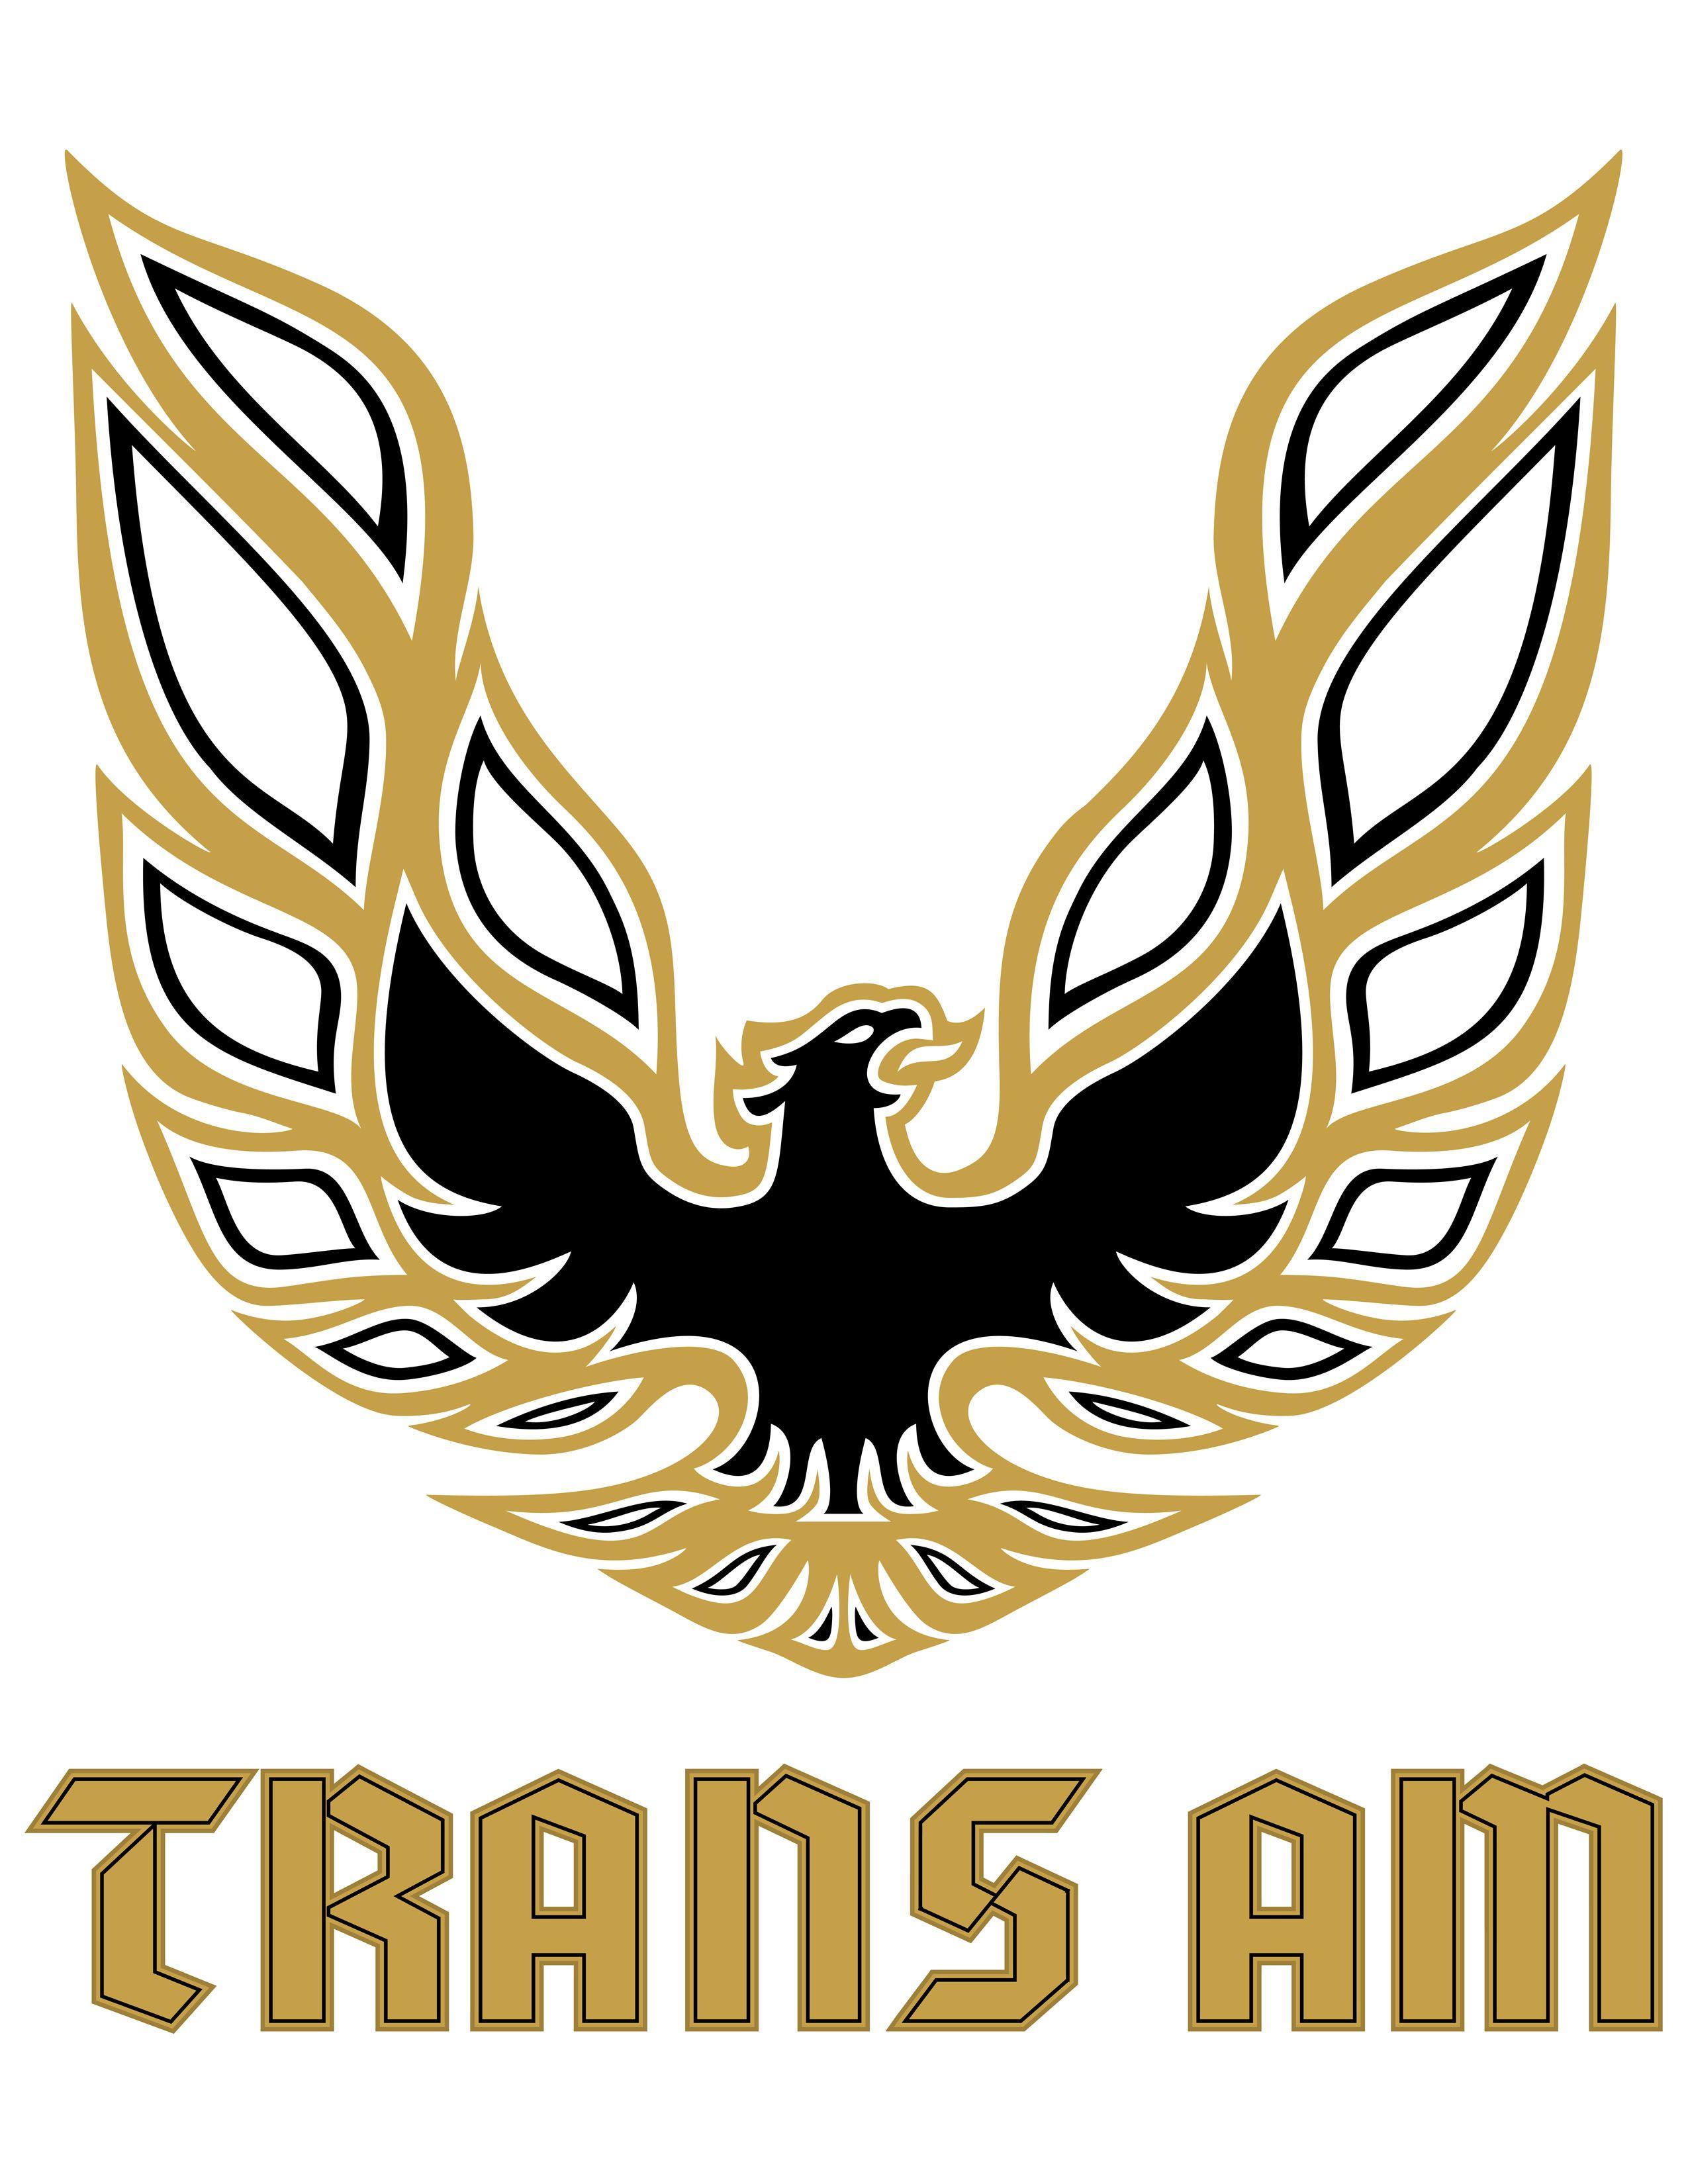 70s Car Logo - 1978 trans am decal | ... 1978 Trans Am. The text logo is the front ...